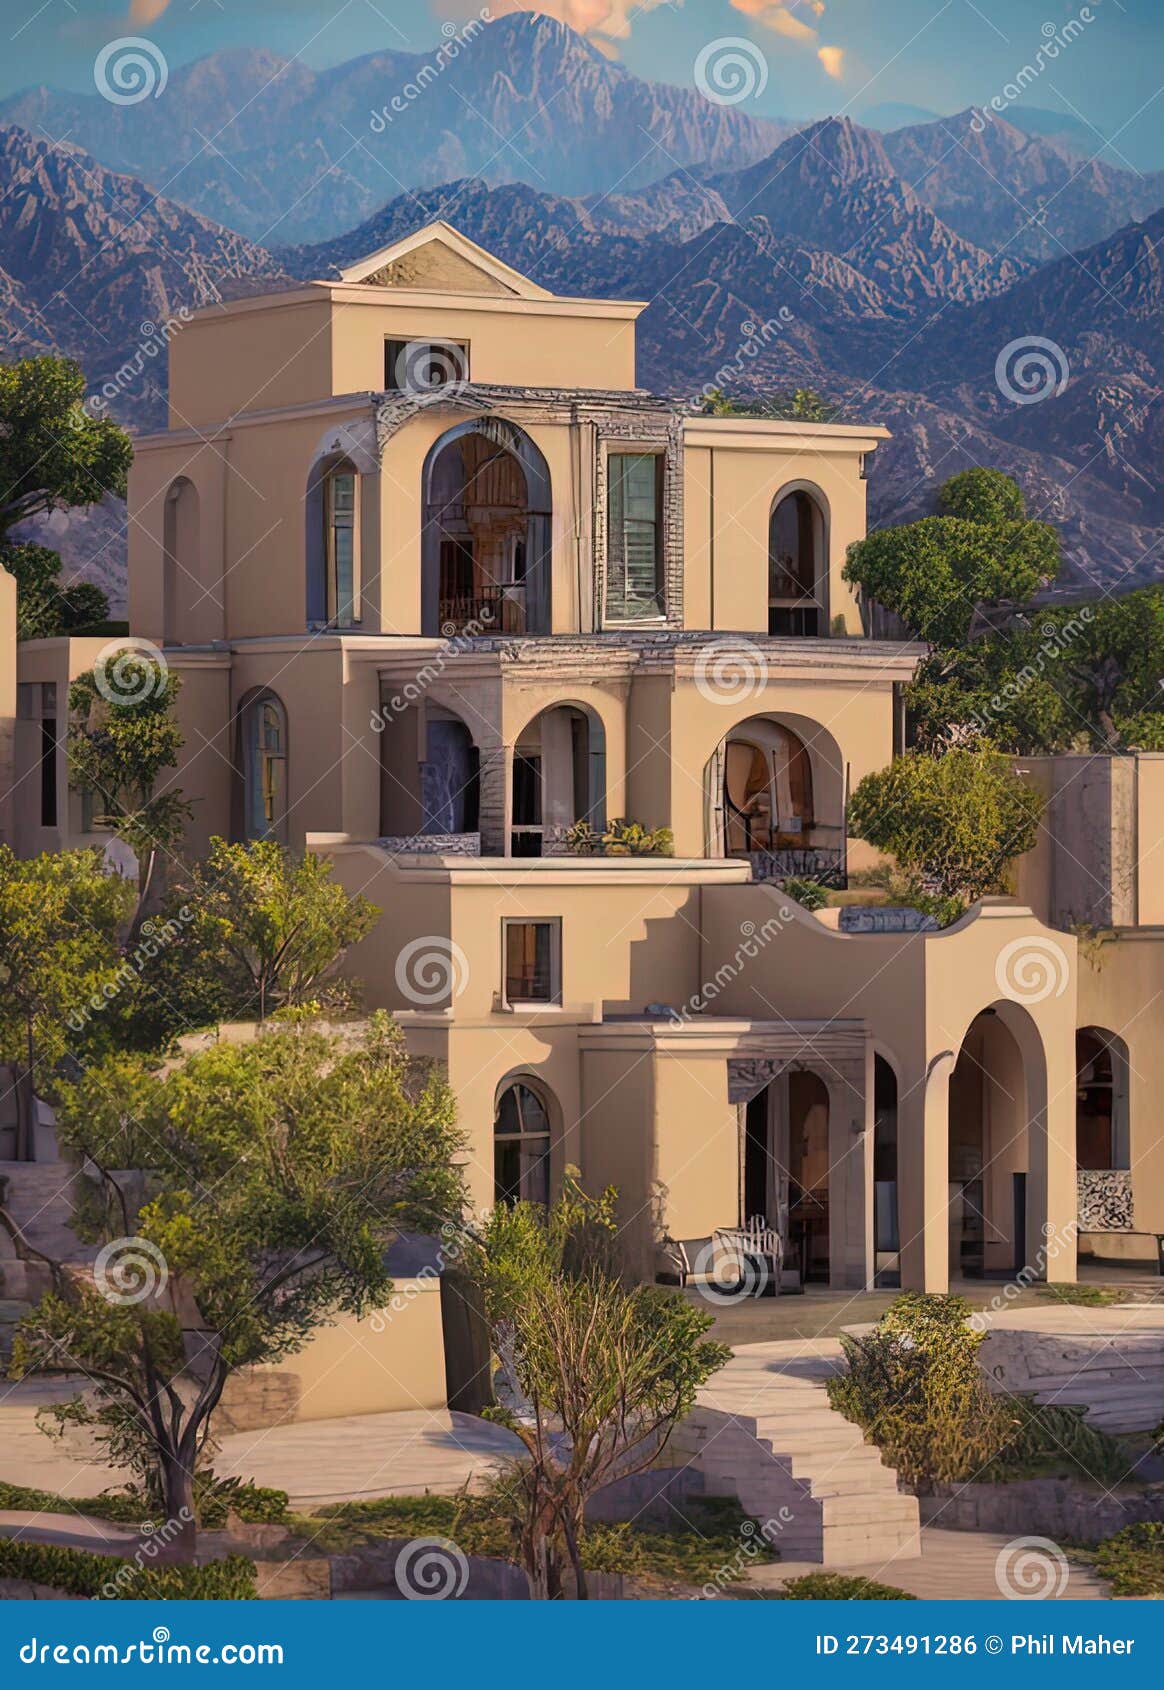 fictional mansion in guadalupe, nuevo leÃ³n, mexico.